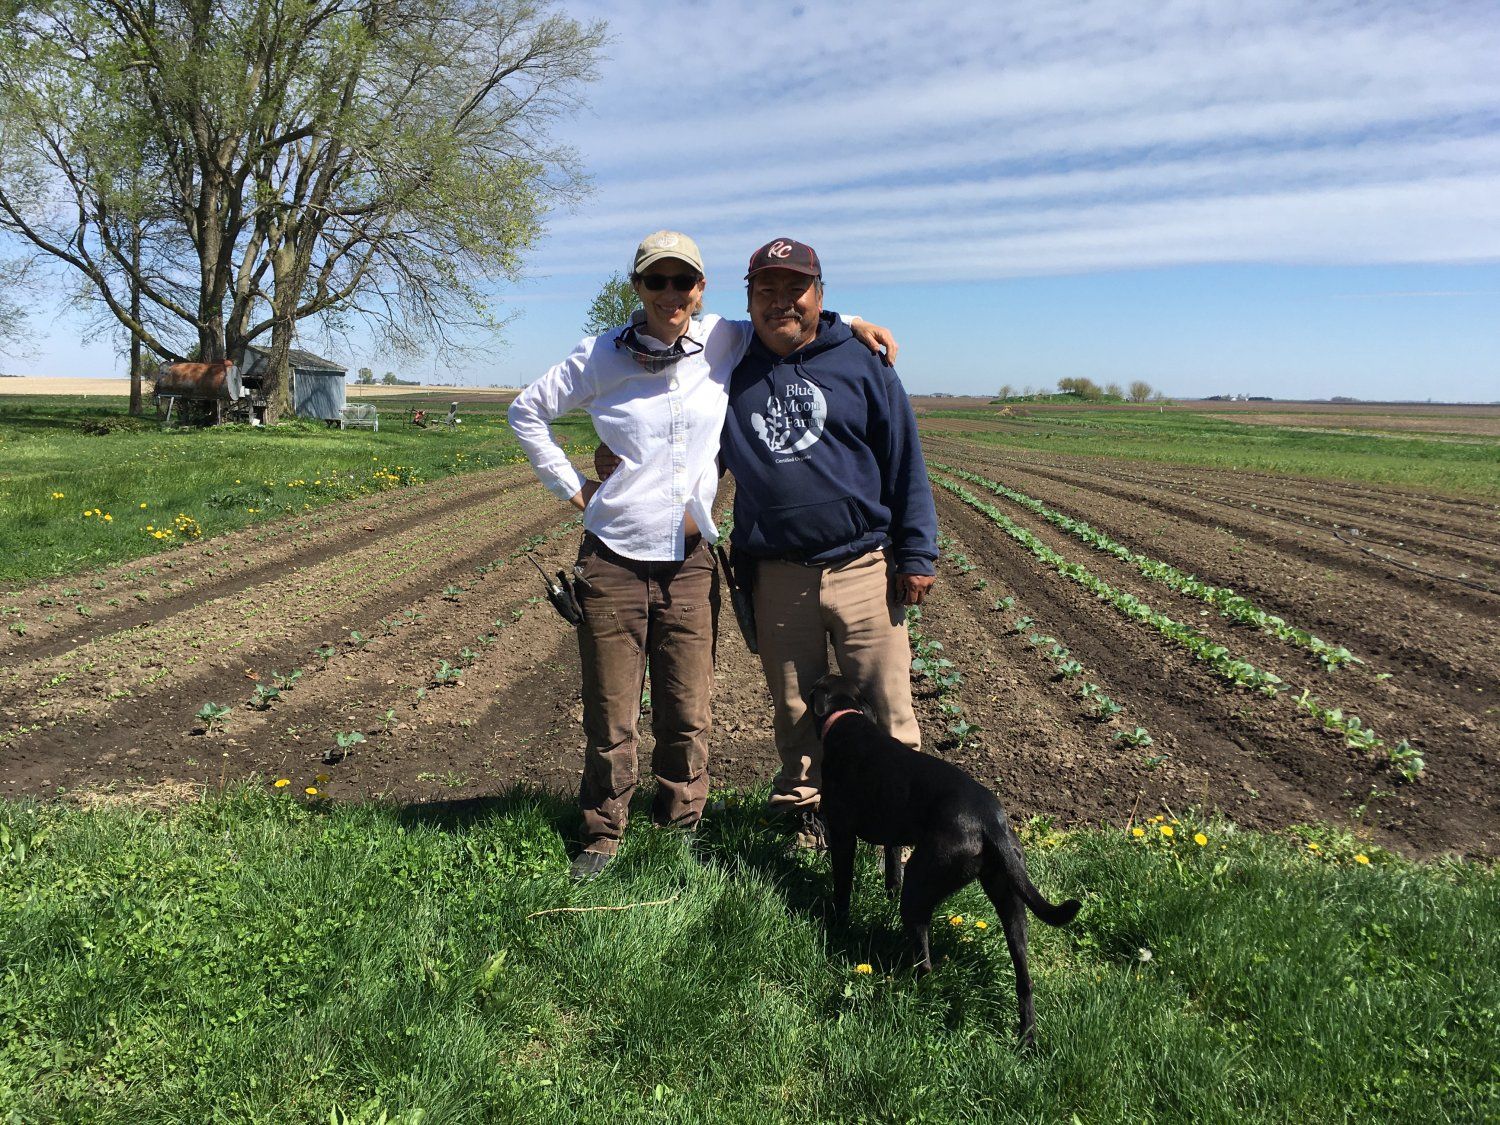 Next Happening: Farm Happenings for May 5, 2021